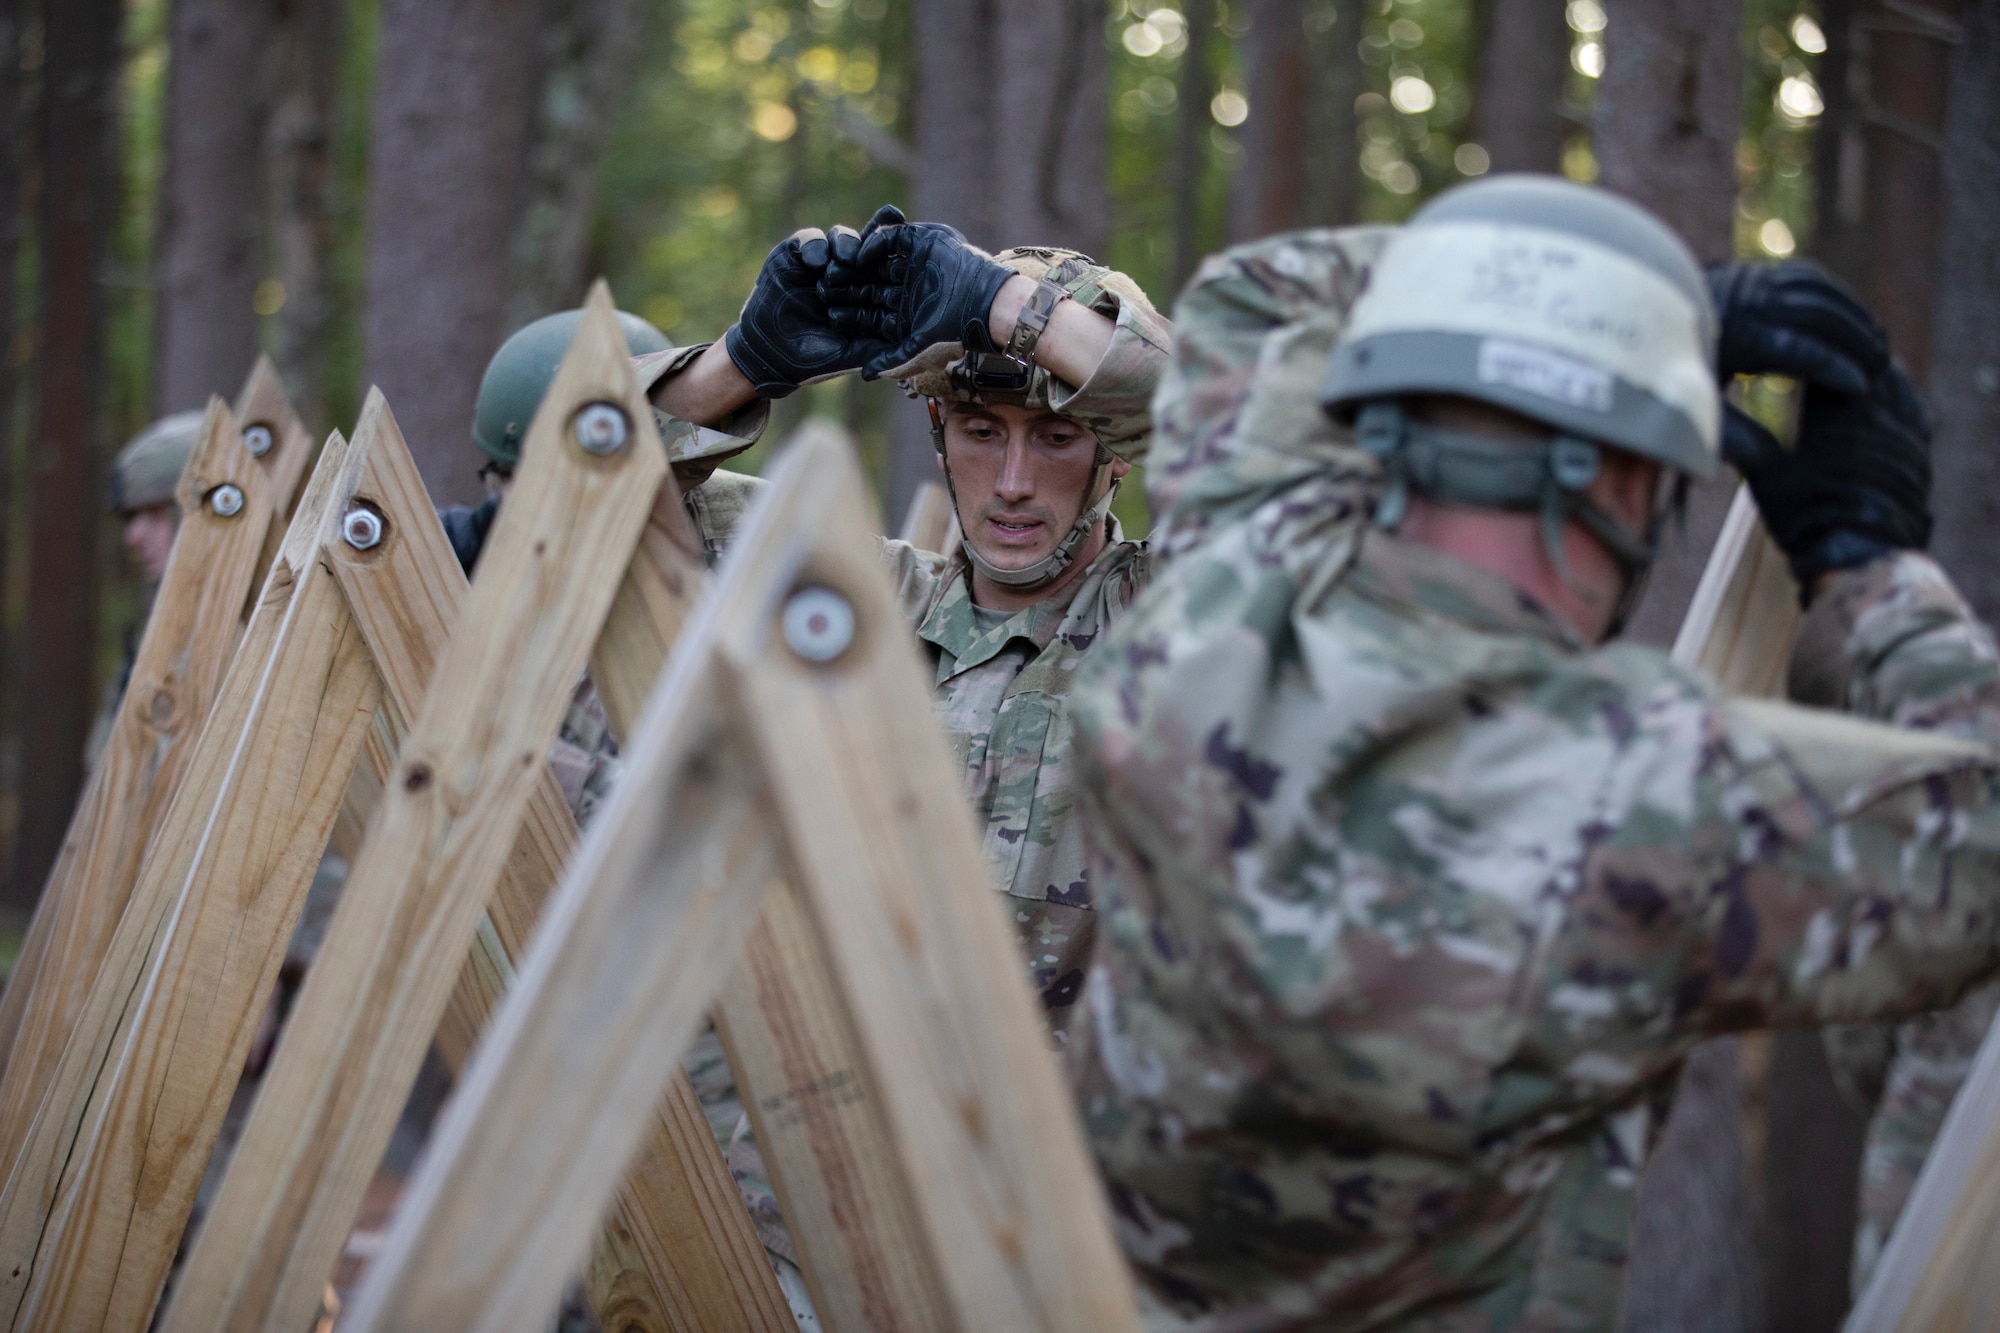 Airmen and Soldiers complete obstacles at Ranger assessment